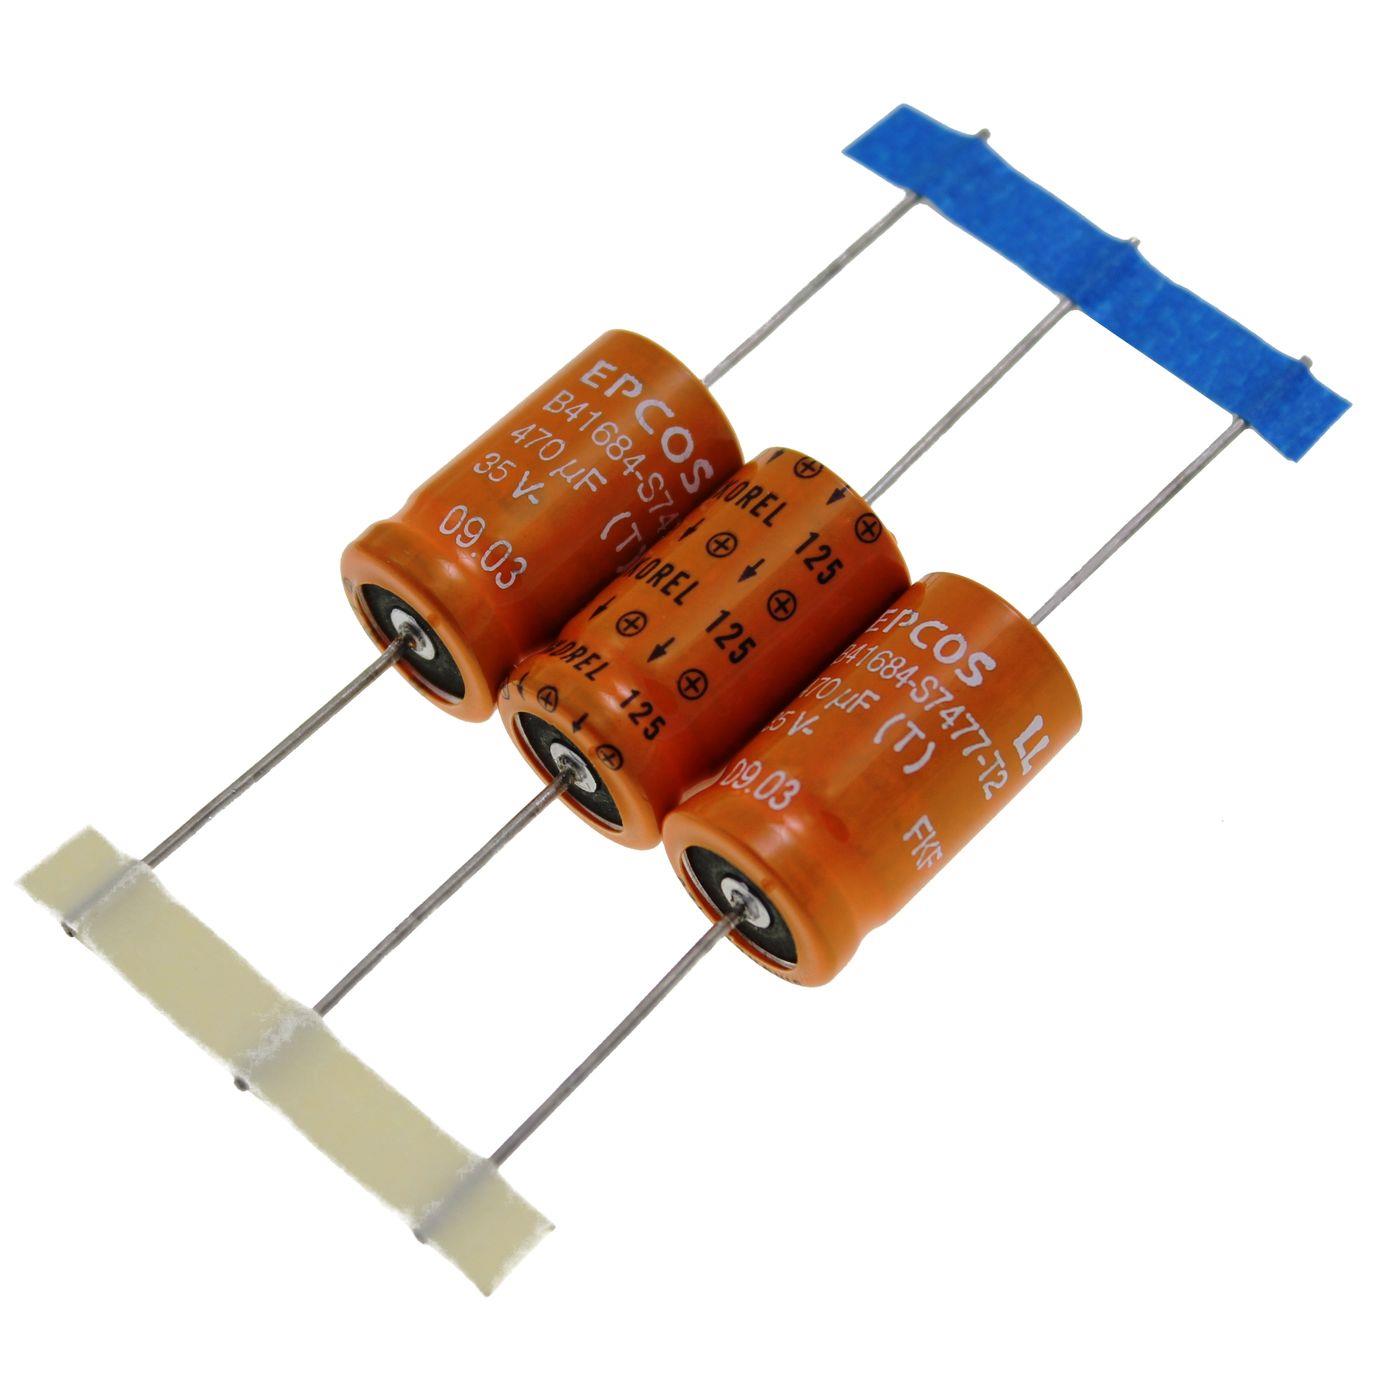 Electrolytic capacitor Axially 470µF 35V 125°C B41684S7477T002 470uF